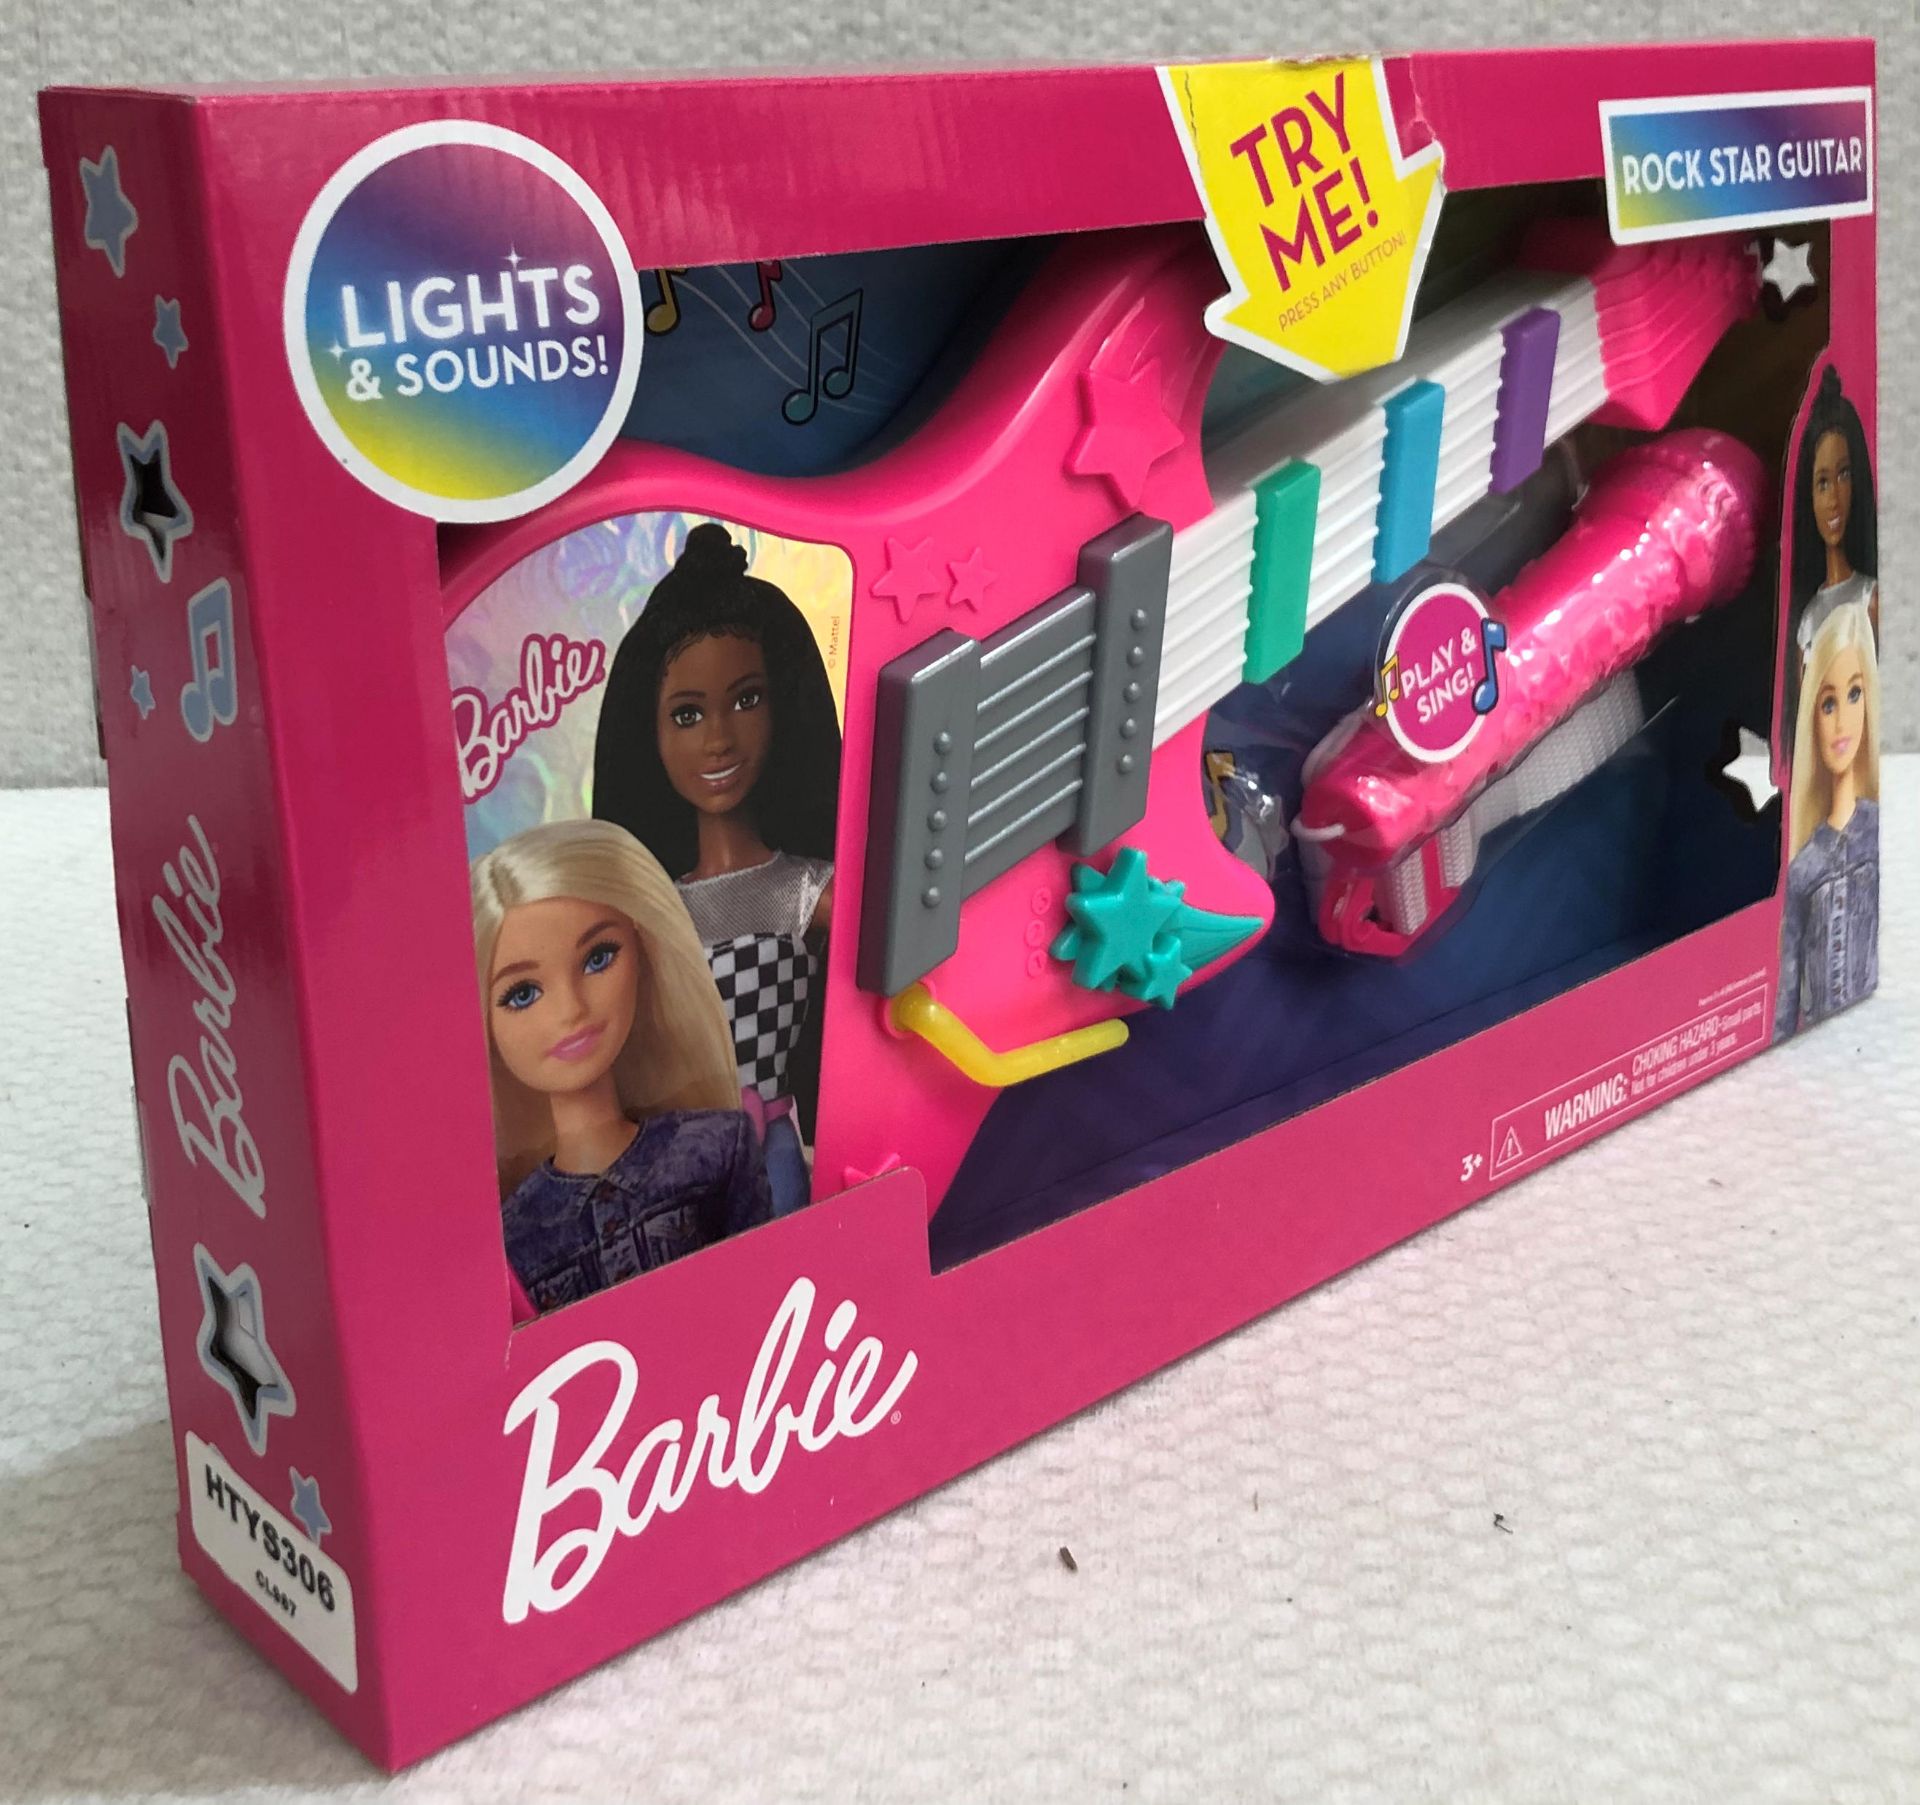 1 x Barbie Rock Star Guitar - New/Boxed - HTYS306 - CL987 - Location: Altrincham WA14 - RRP: £ - Image 6 of 6